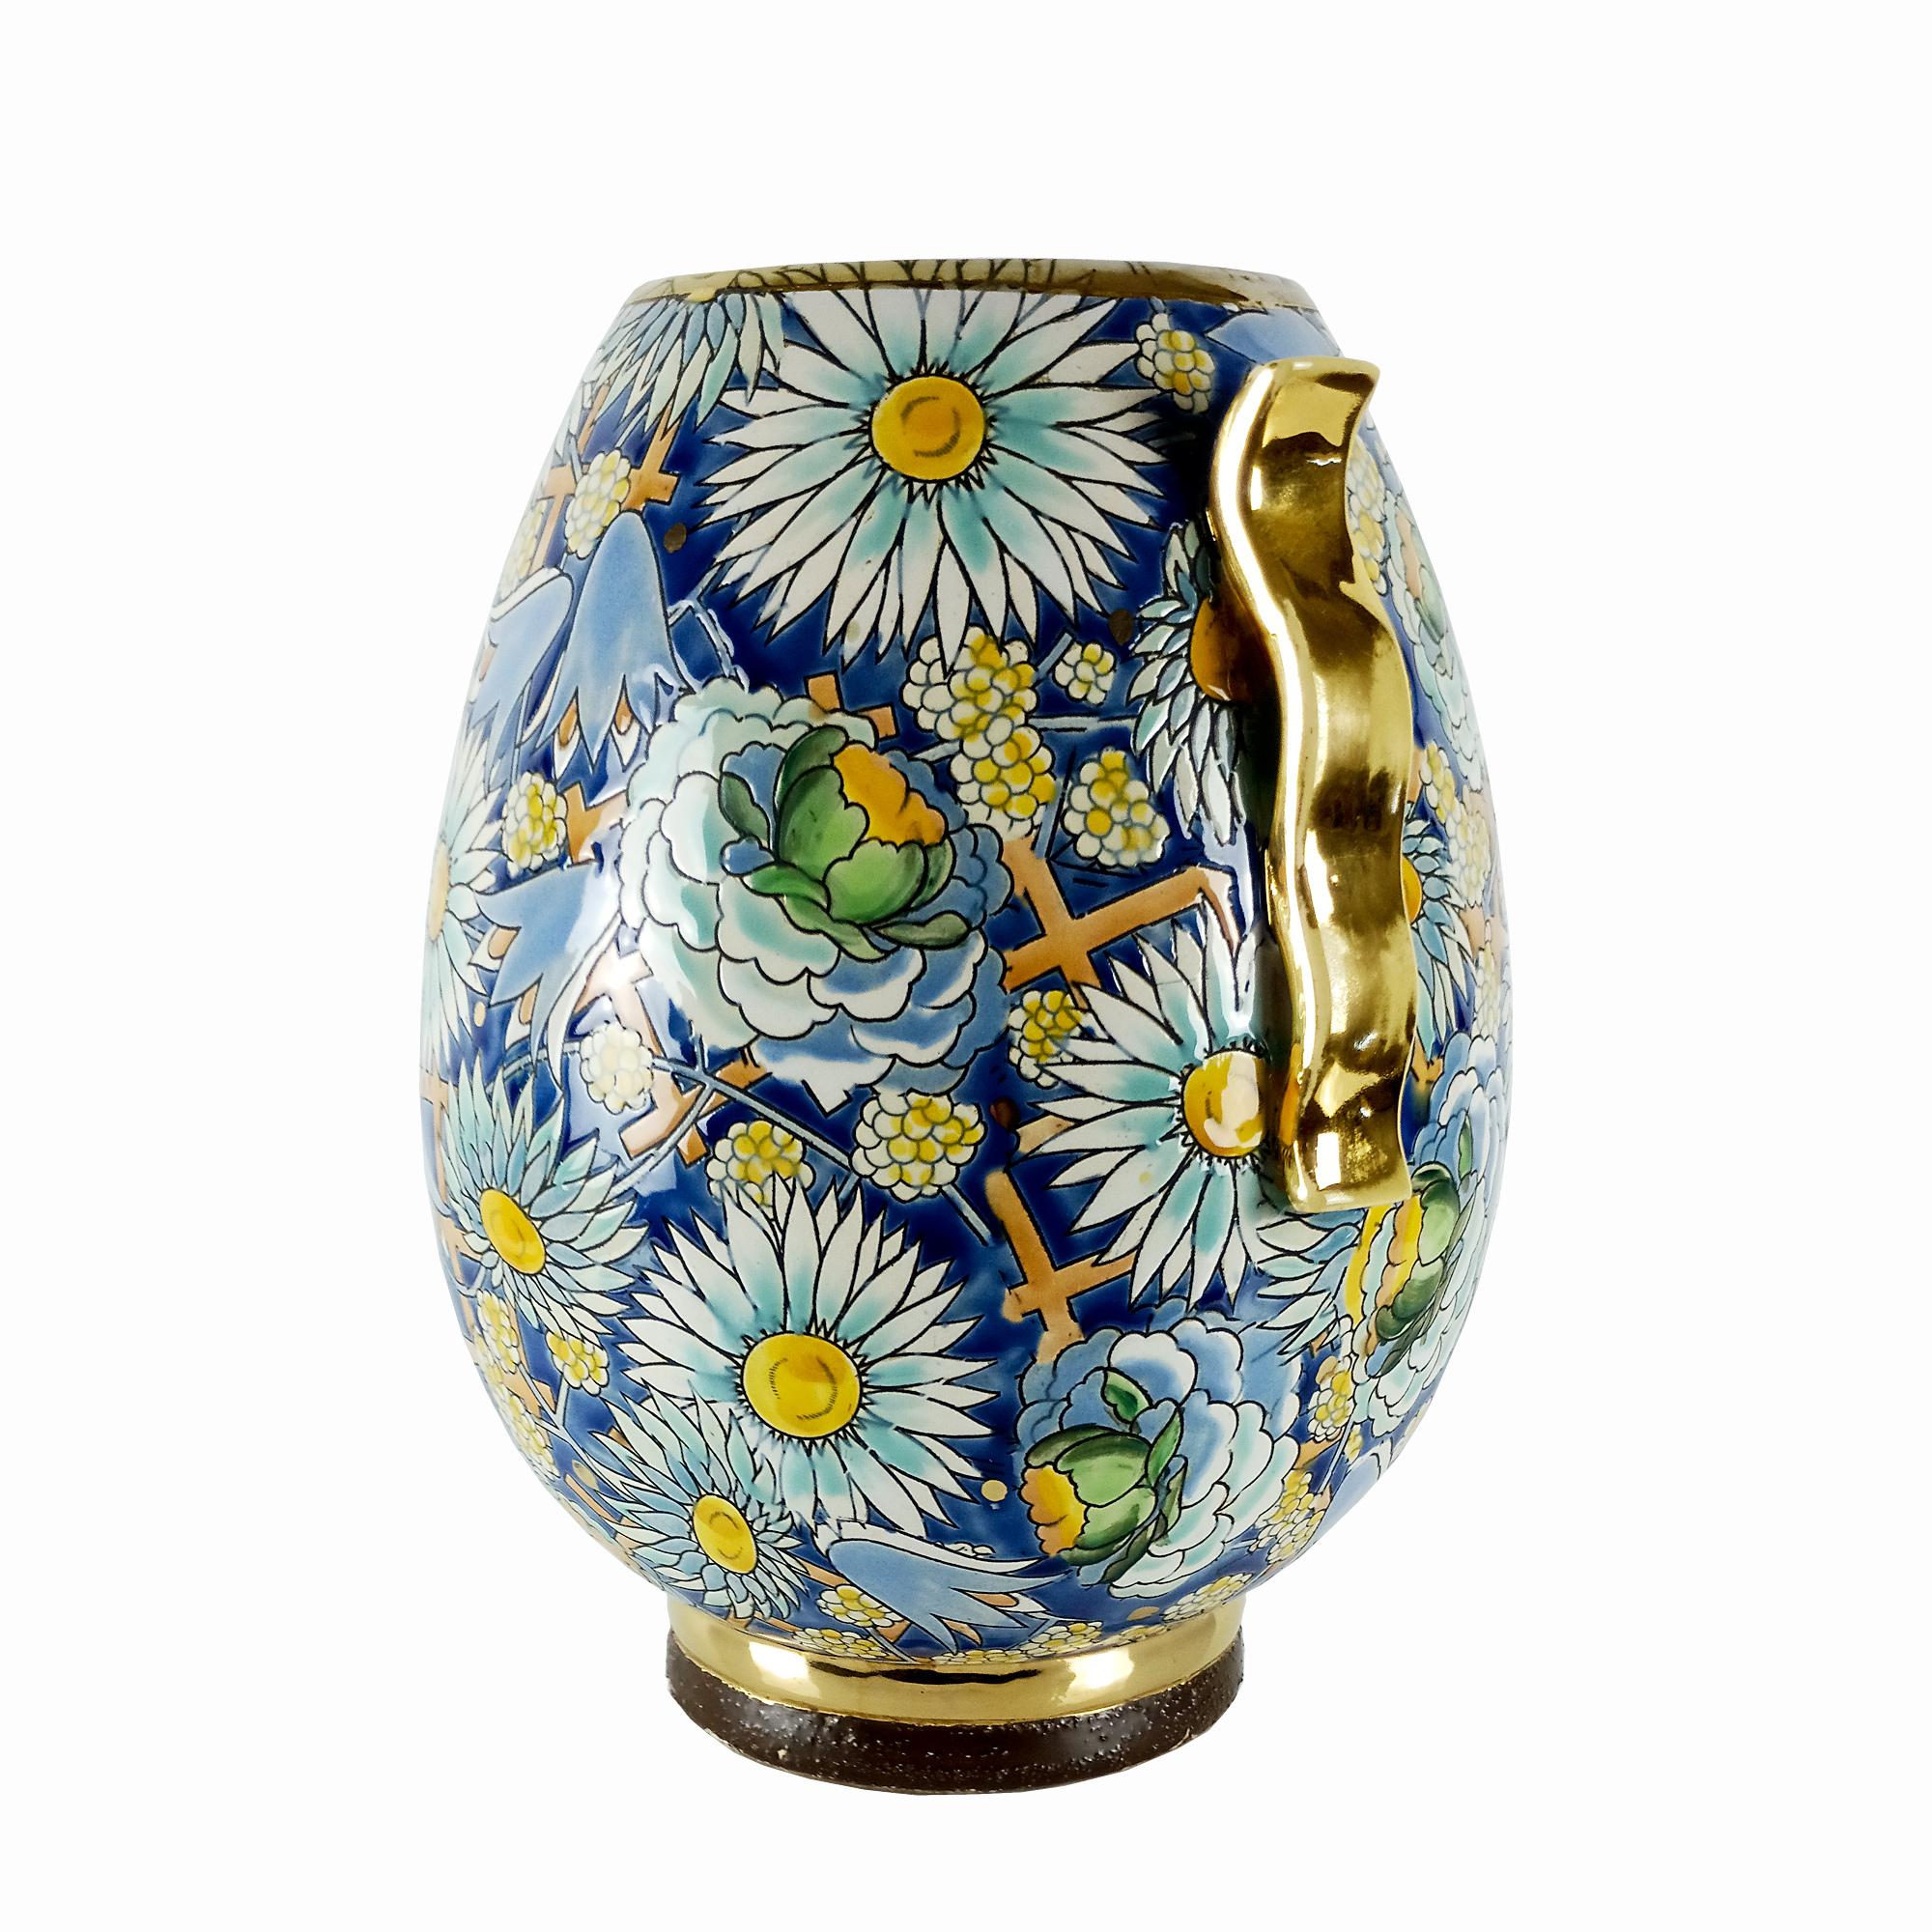 Art Deco vase in enamelled ceramic with floral and geometric motifs, partially gilded handles and base.
Created by Raymond Chevallier (1900-1959), successor to Charles Catteau.
Production: Boch La Louviere.

Belgium c.1925.